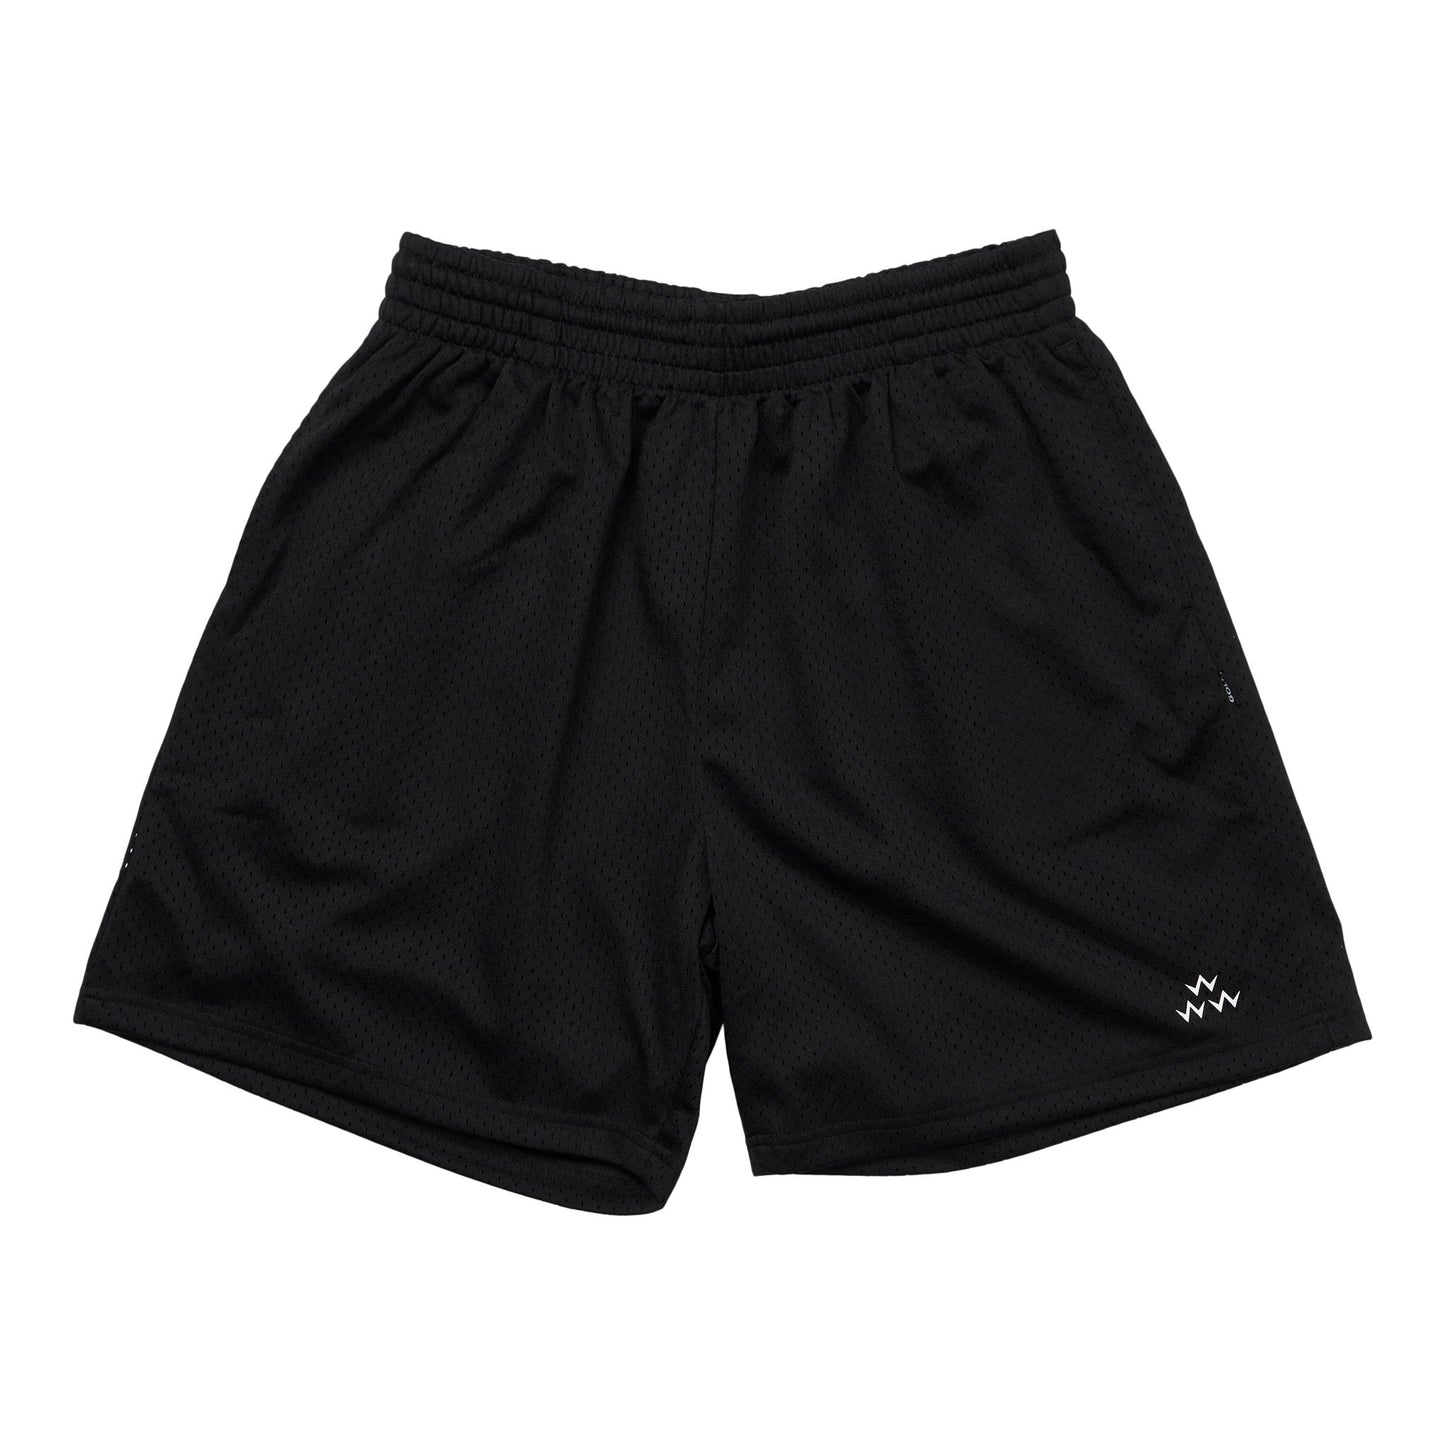 birds-of-condor-black-swing-easy-golf-club-happy-place-champions-fifa-world-cup-football-mesh-basketball-shorts-front